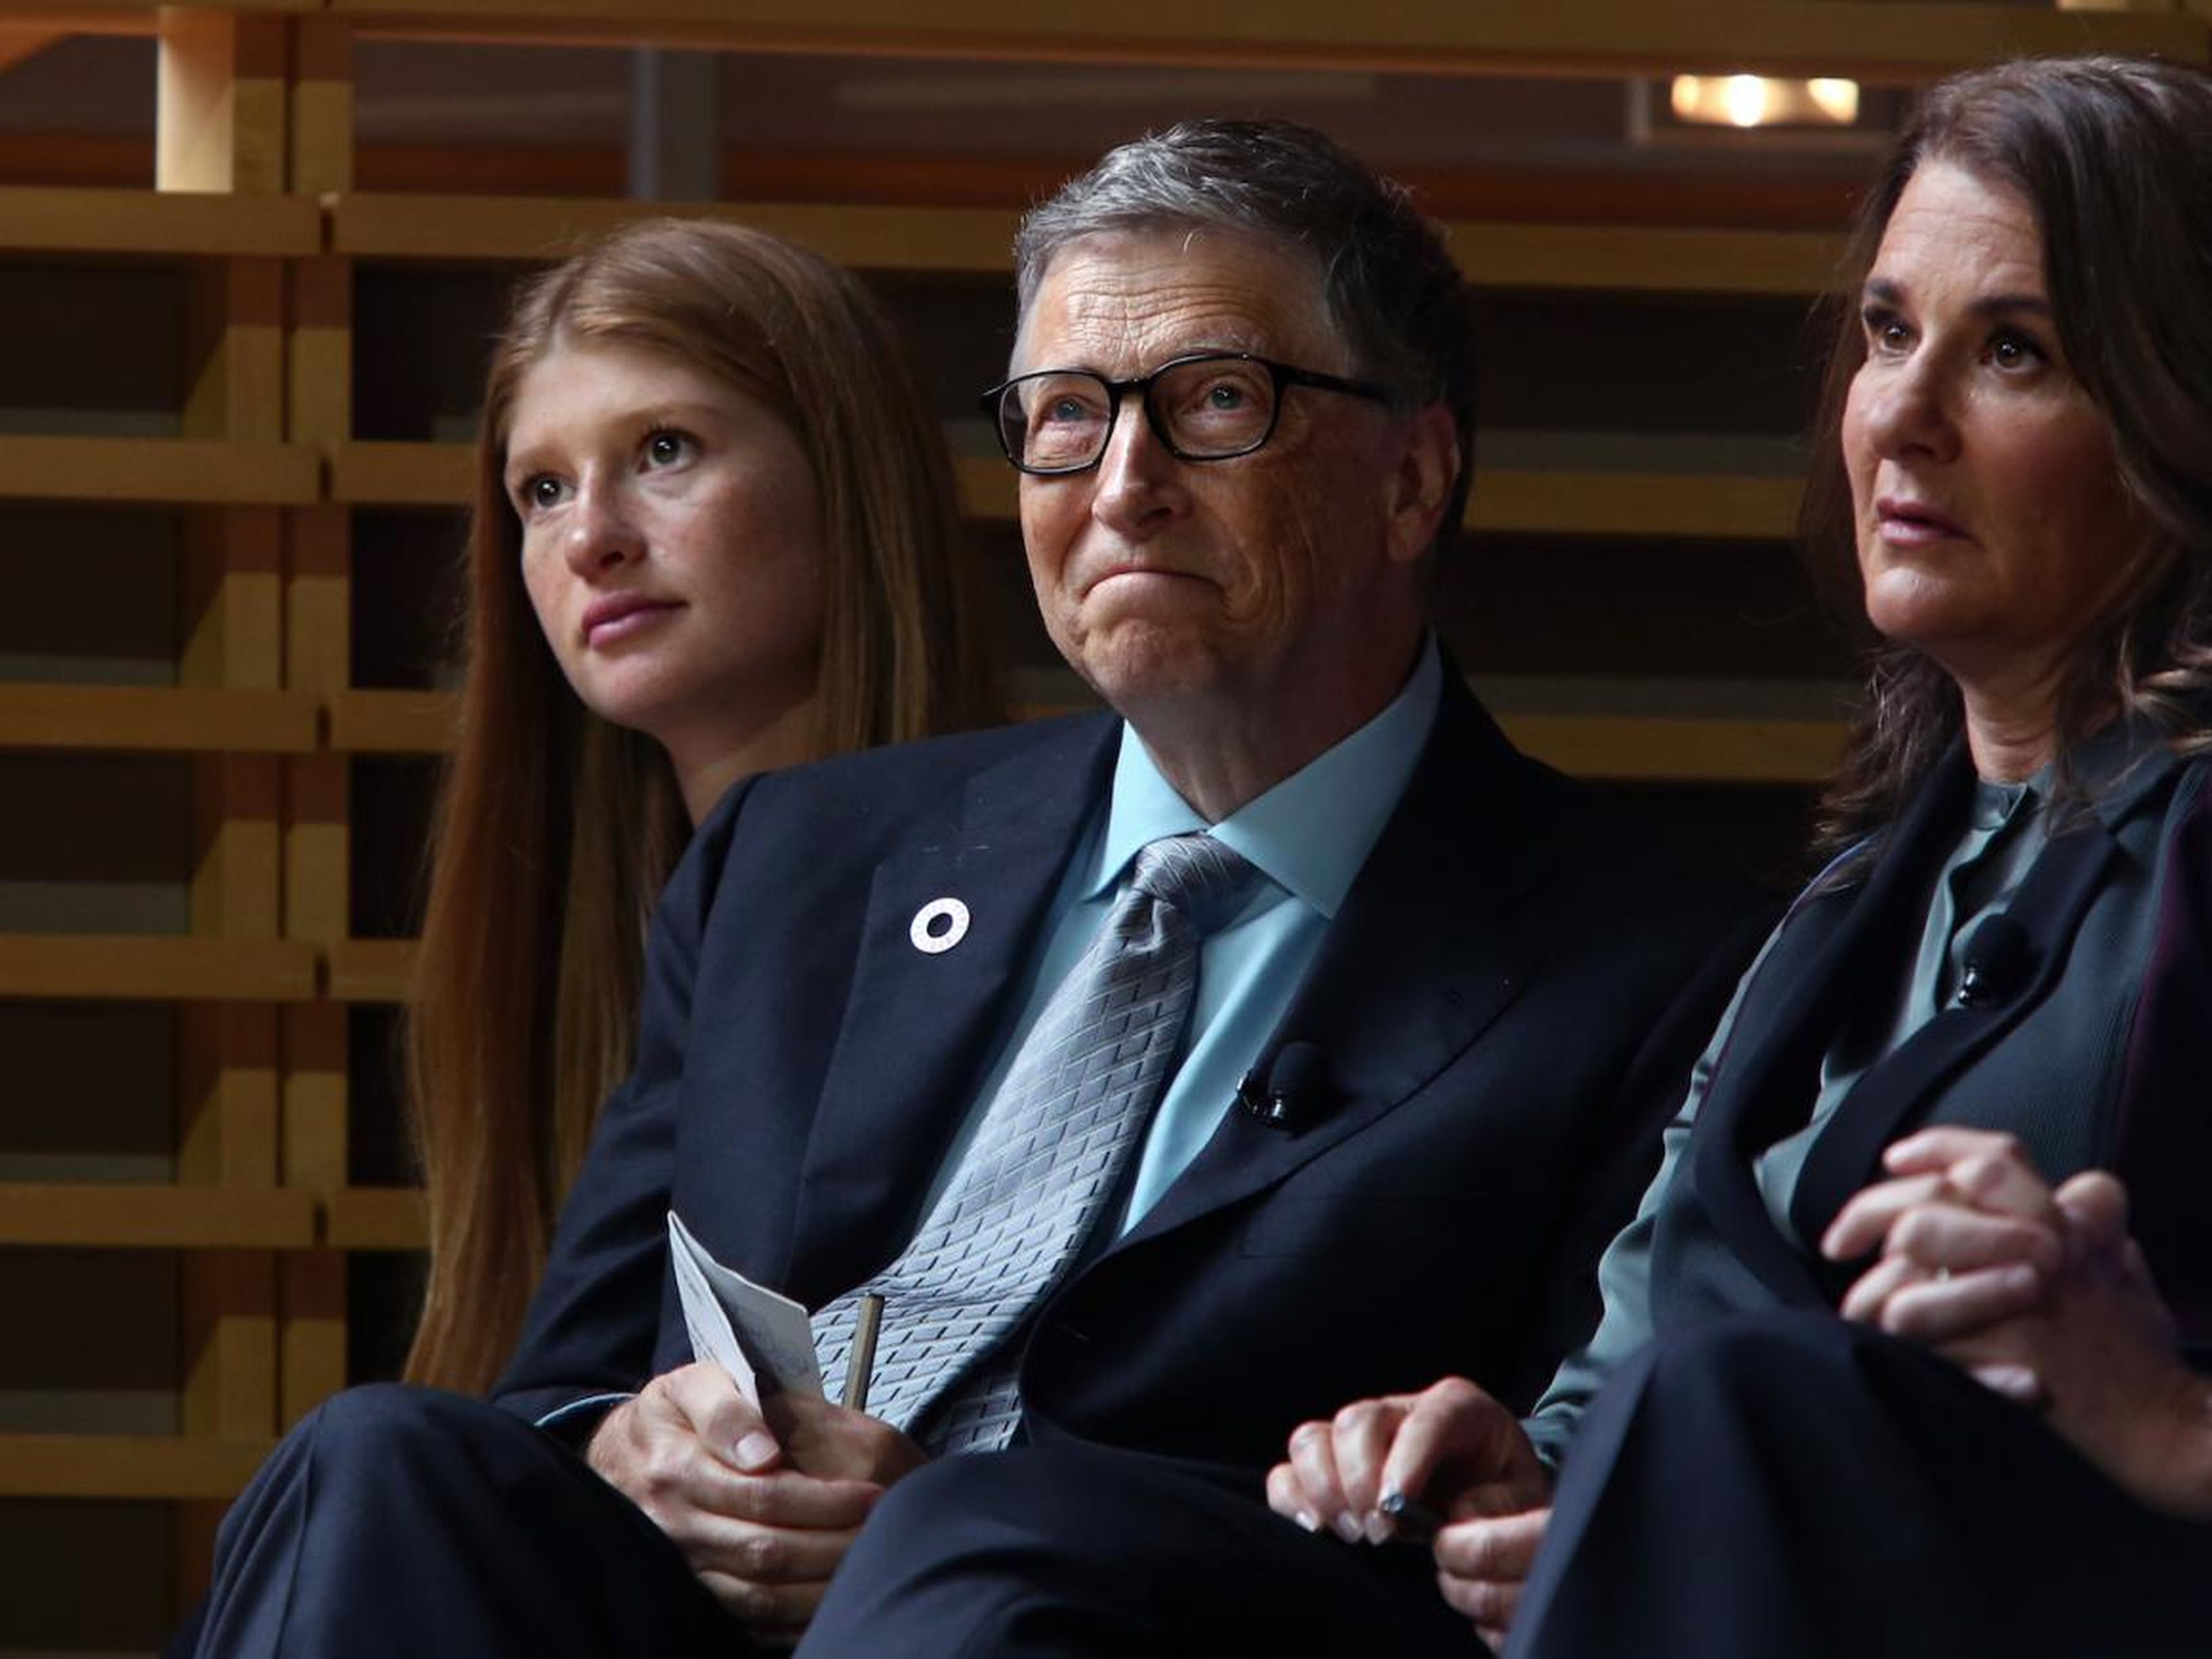 Bill Gates with his daughter Jennifer Gates (left) and wife Melinda Gates (right).